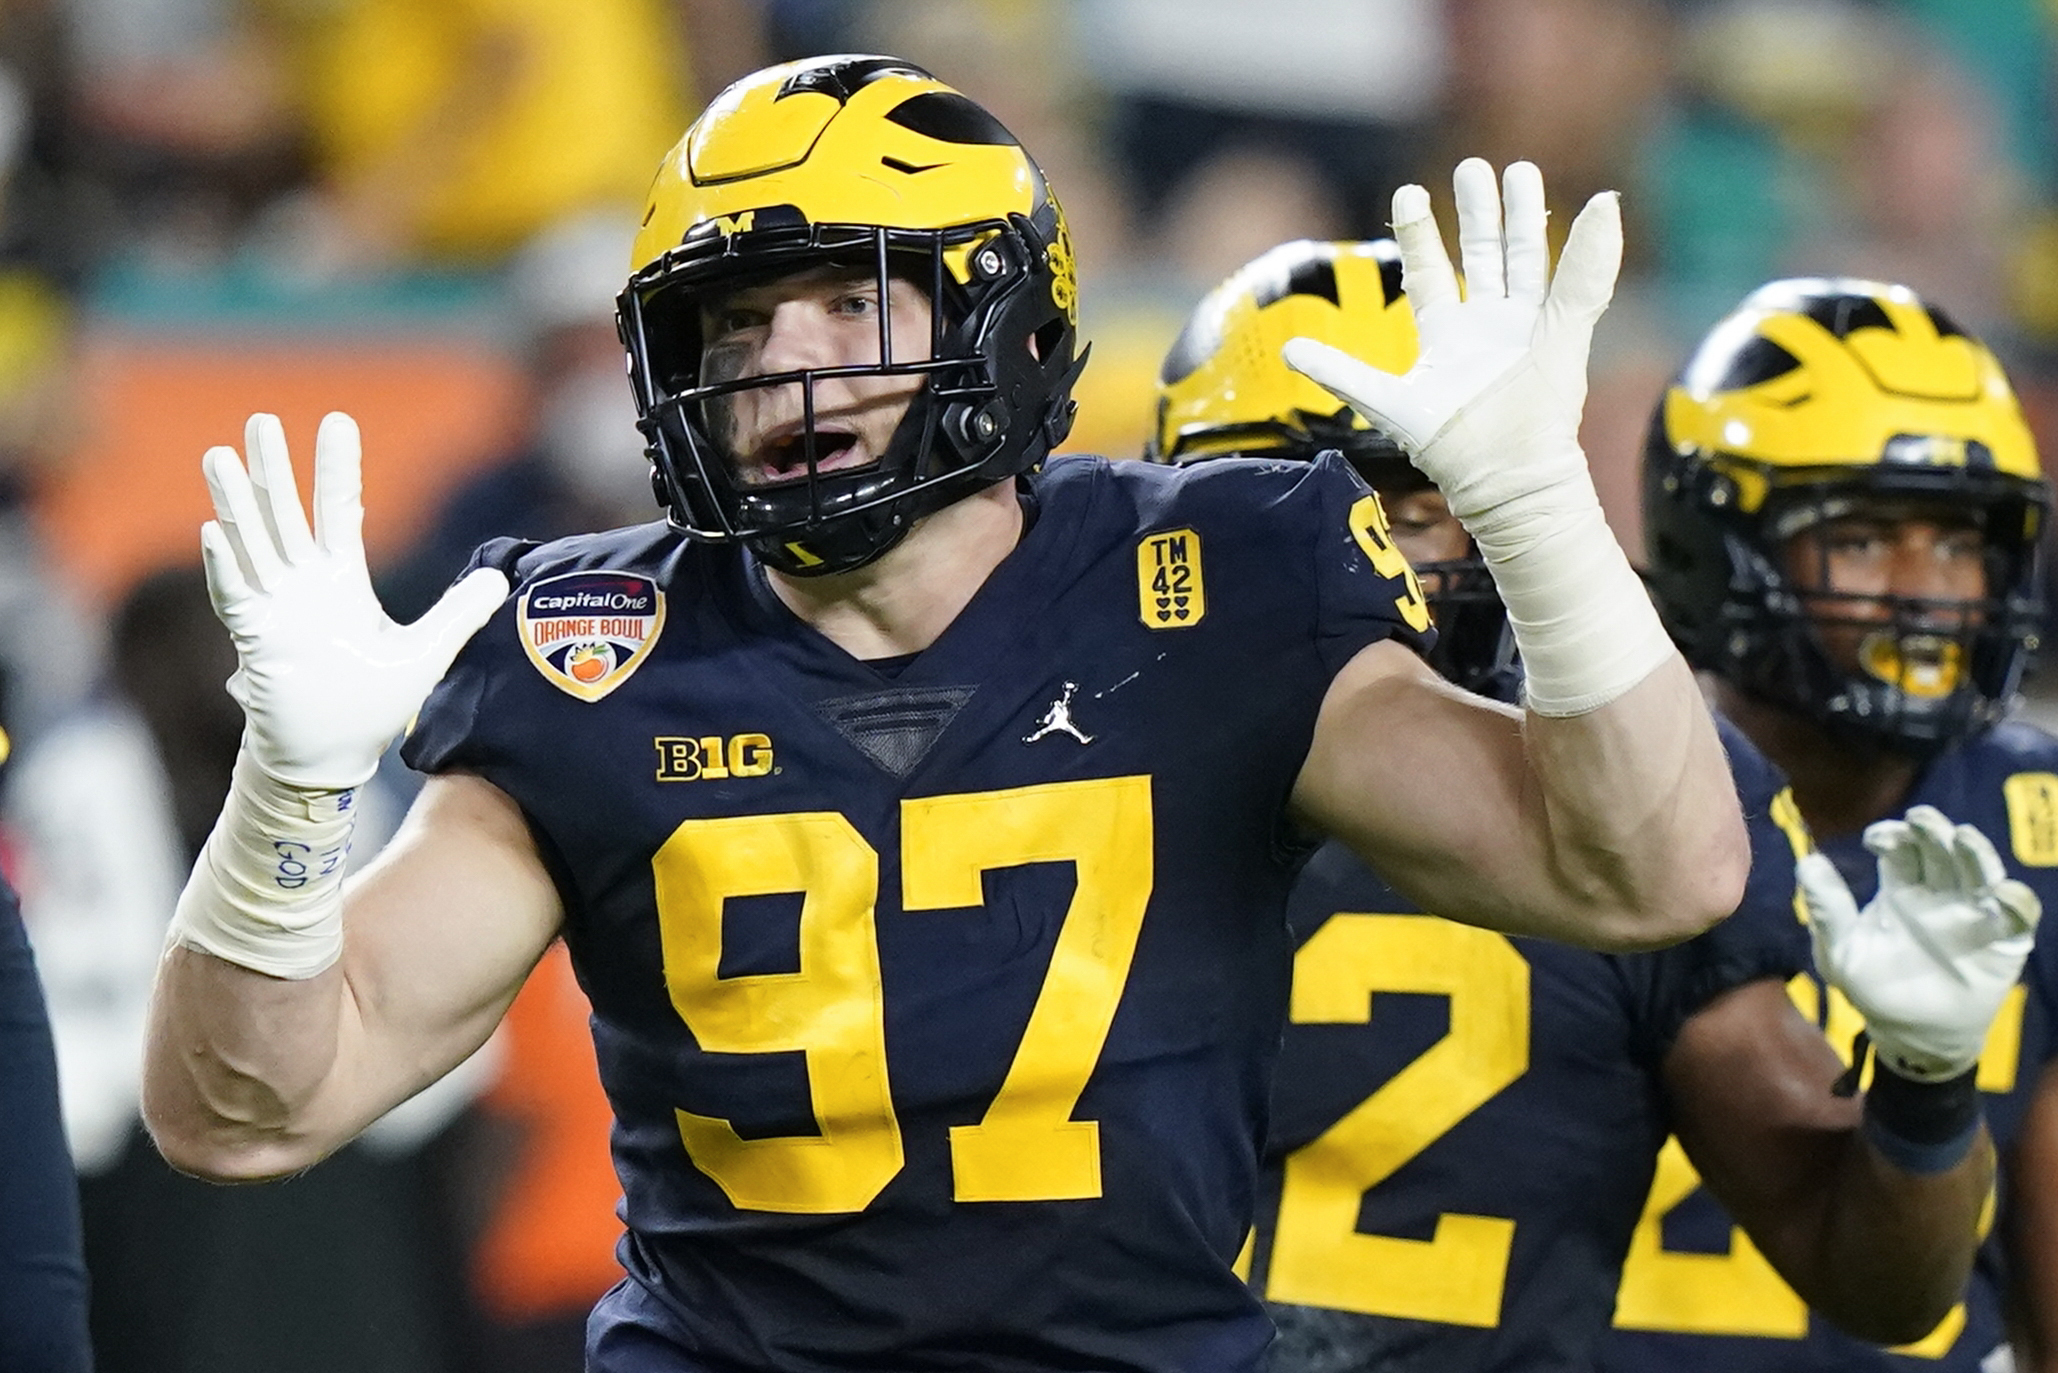 Interior offensive line rankings for the top 32 NFL iOL heading into 2022  led by Zack